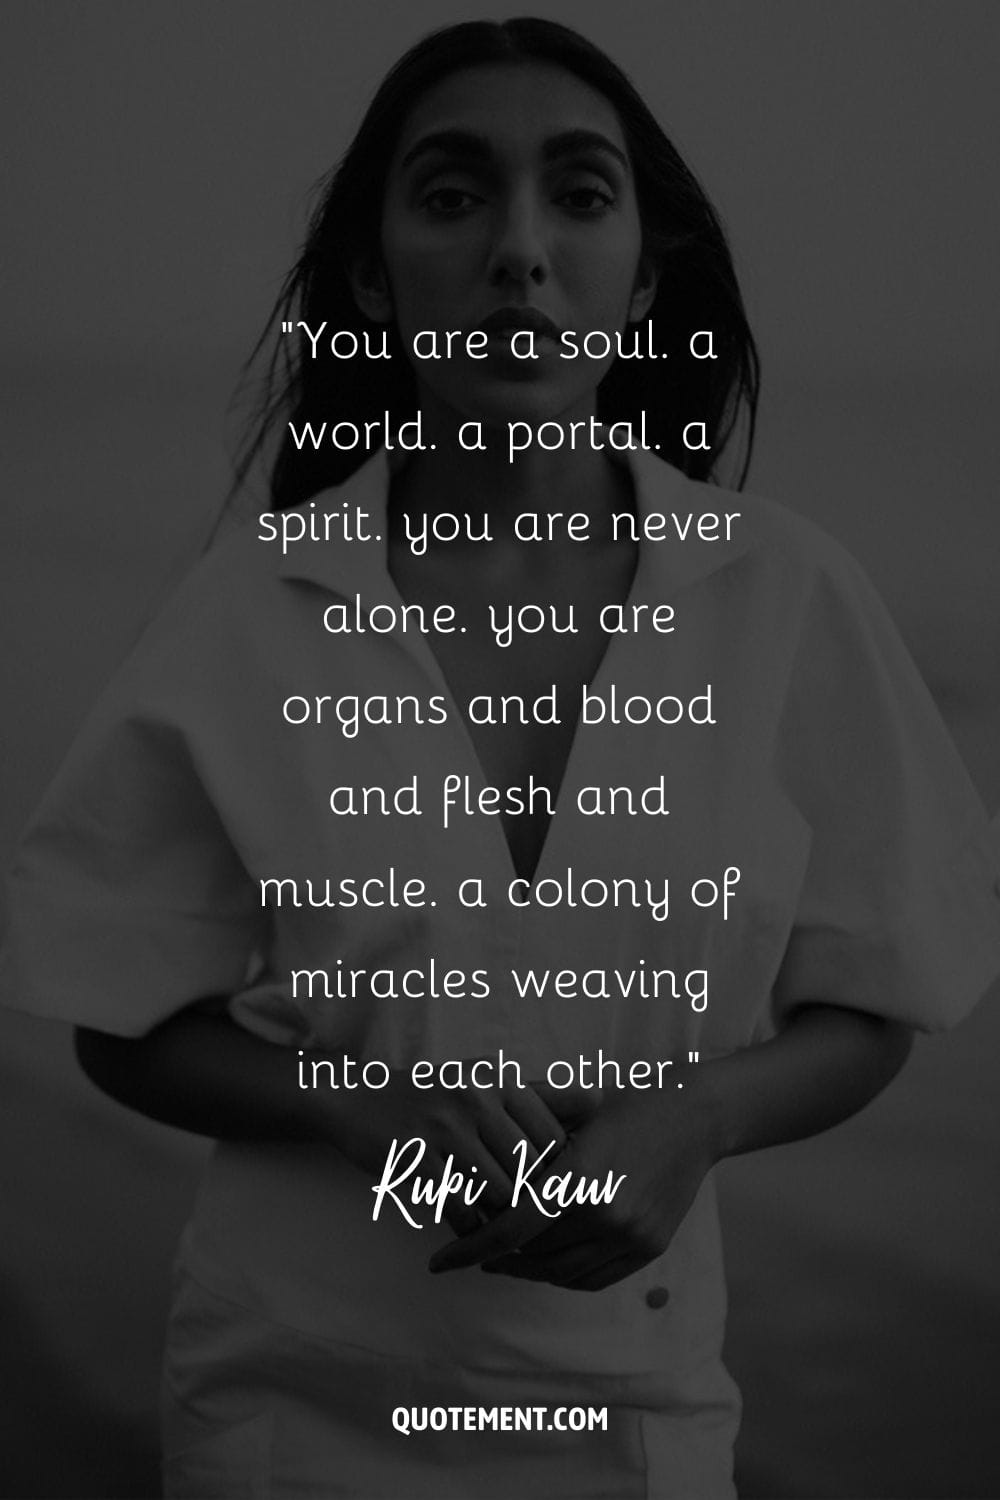 You are a soul. a world. a portal. a spirit. you are never alone. you are organs and blood and flesh and muscle. a colony of miracles weaving into each other.